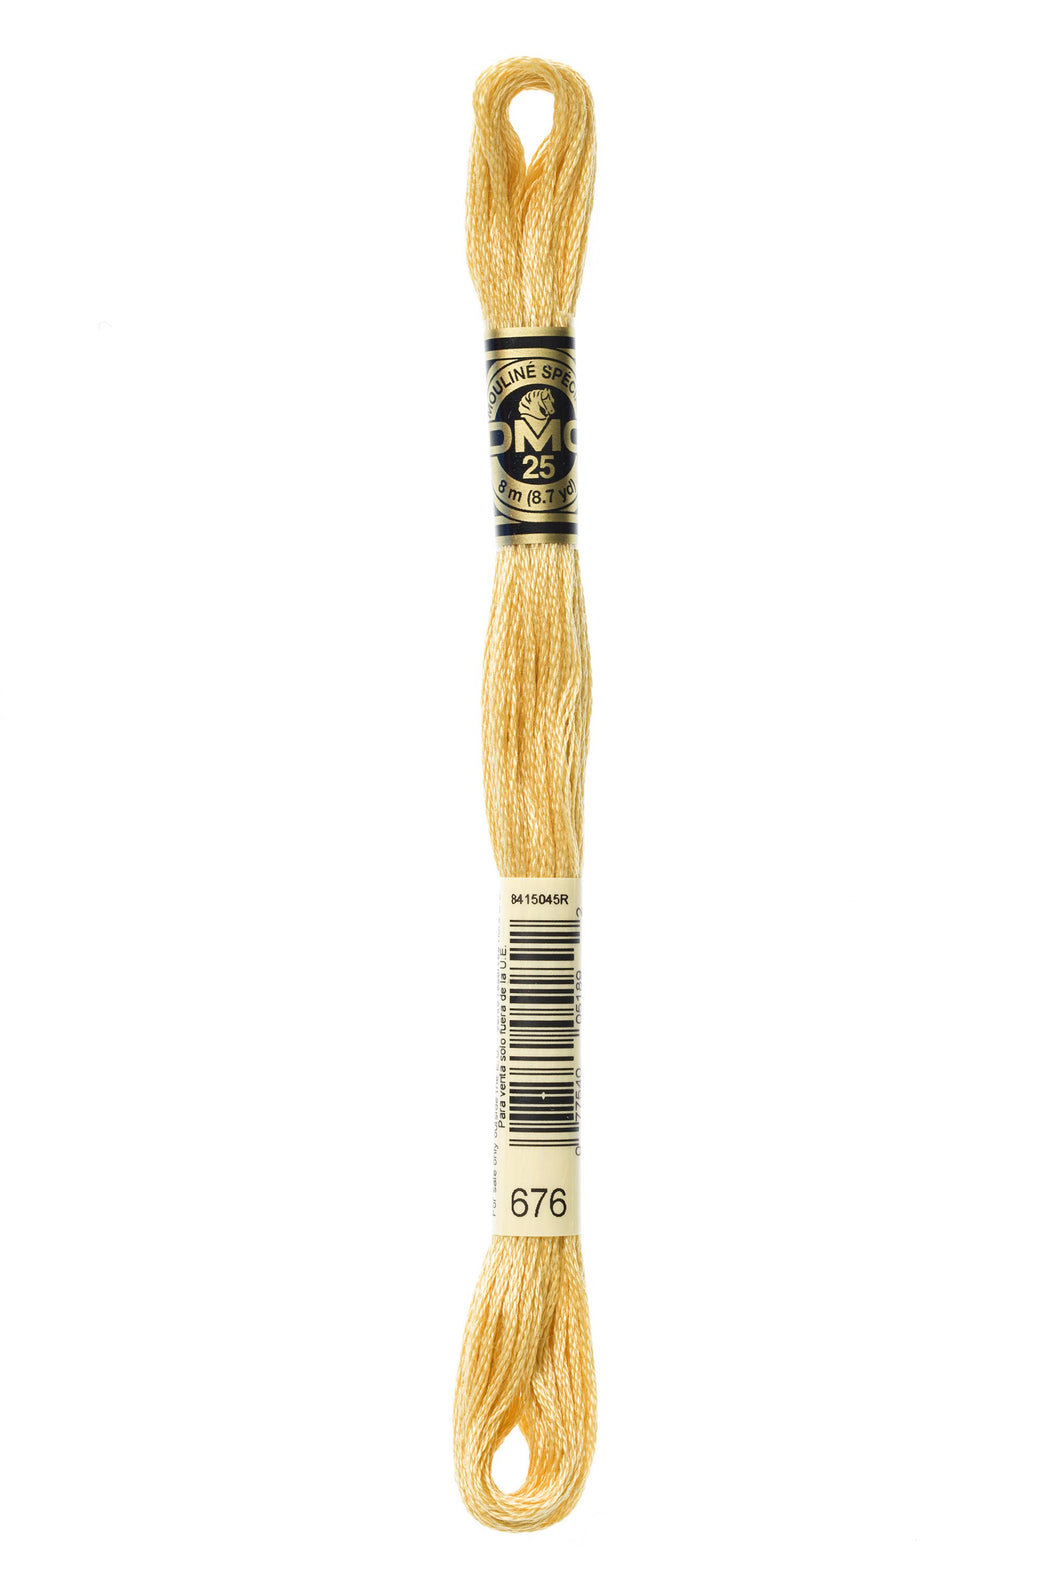 DMC 676 Light Old Gold 6-Strand Embroidery Floss